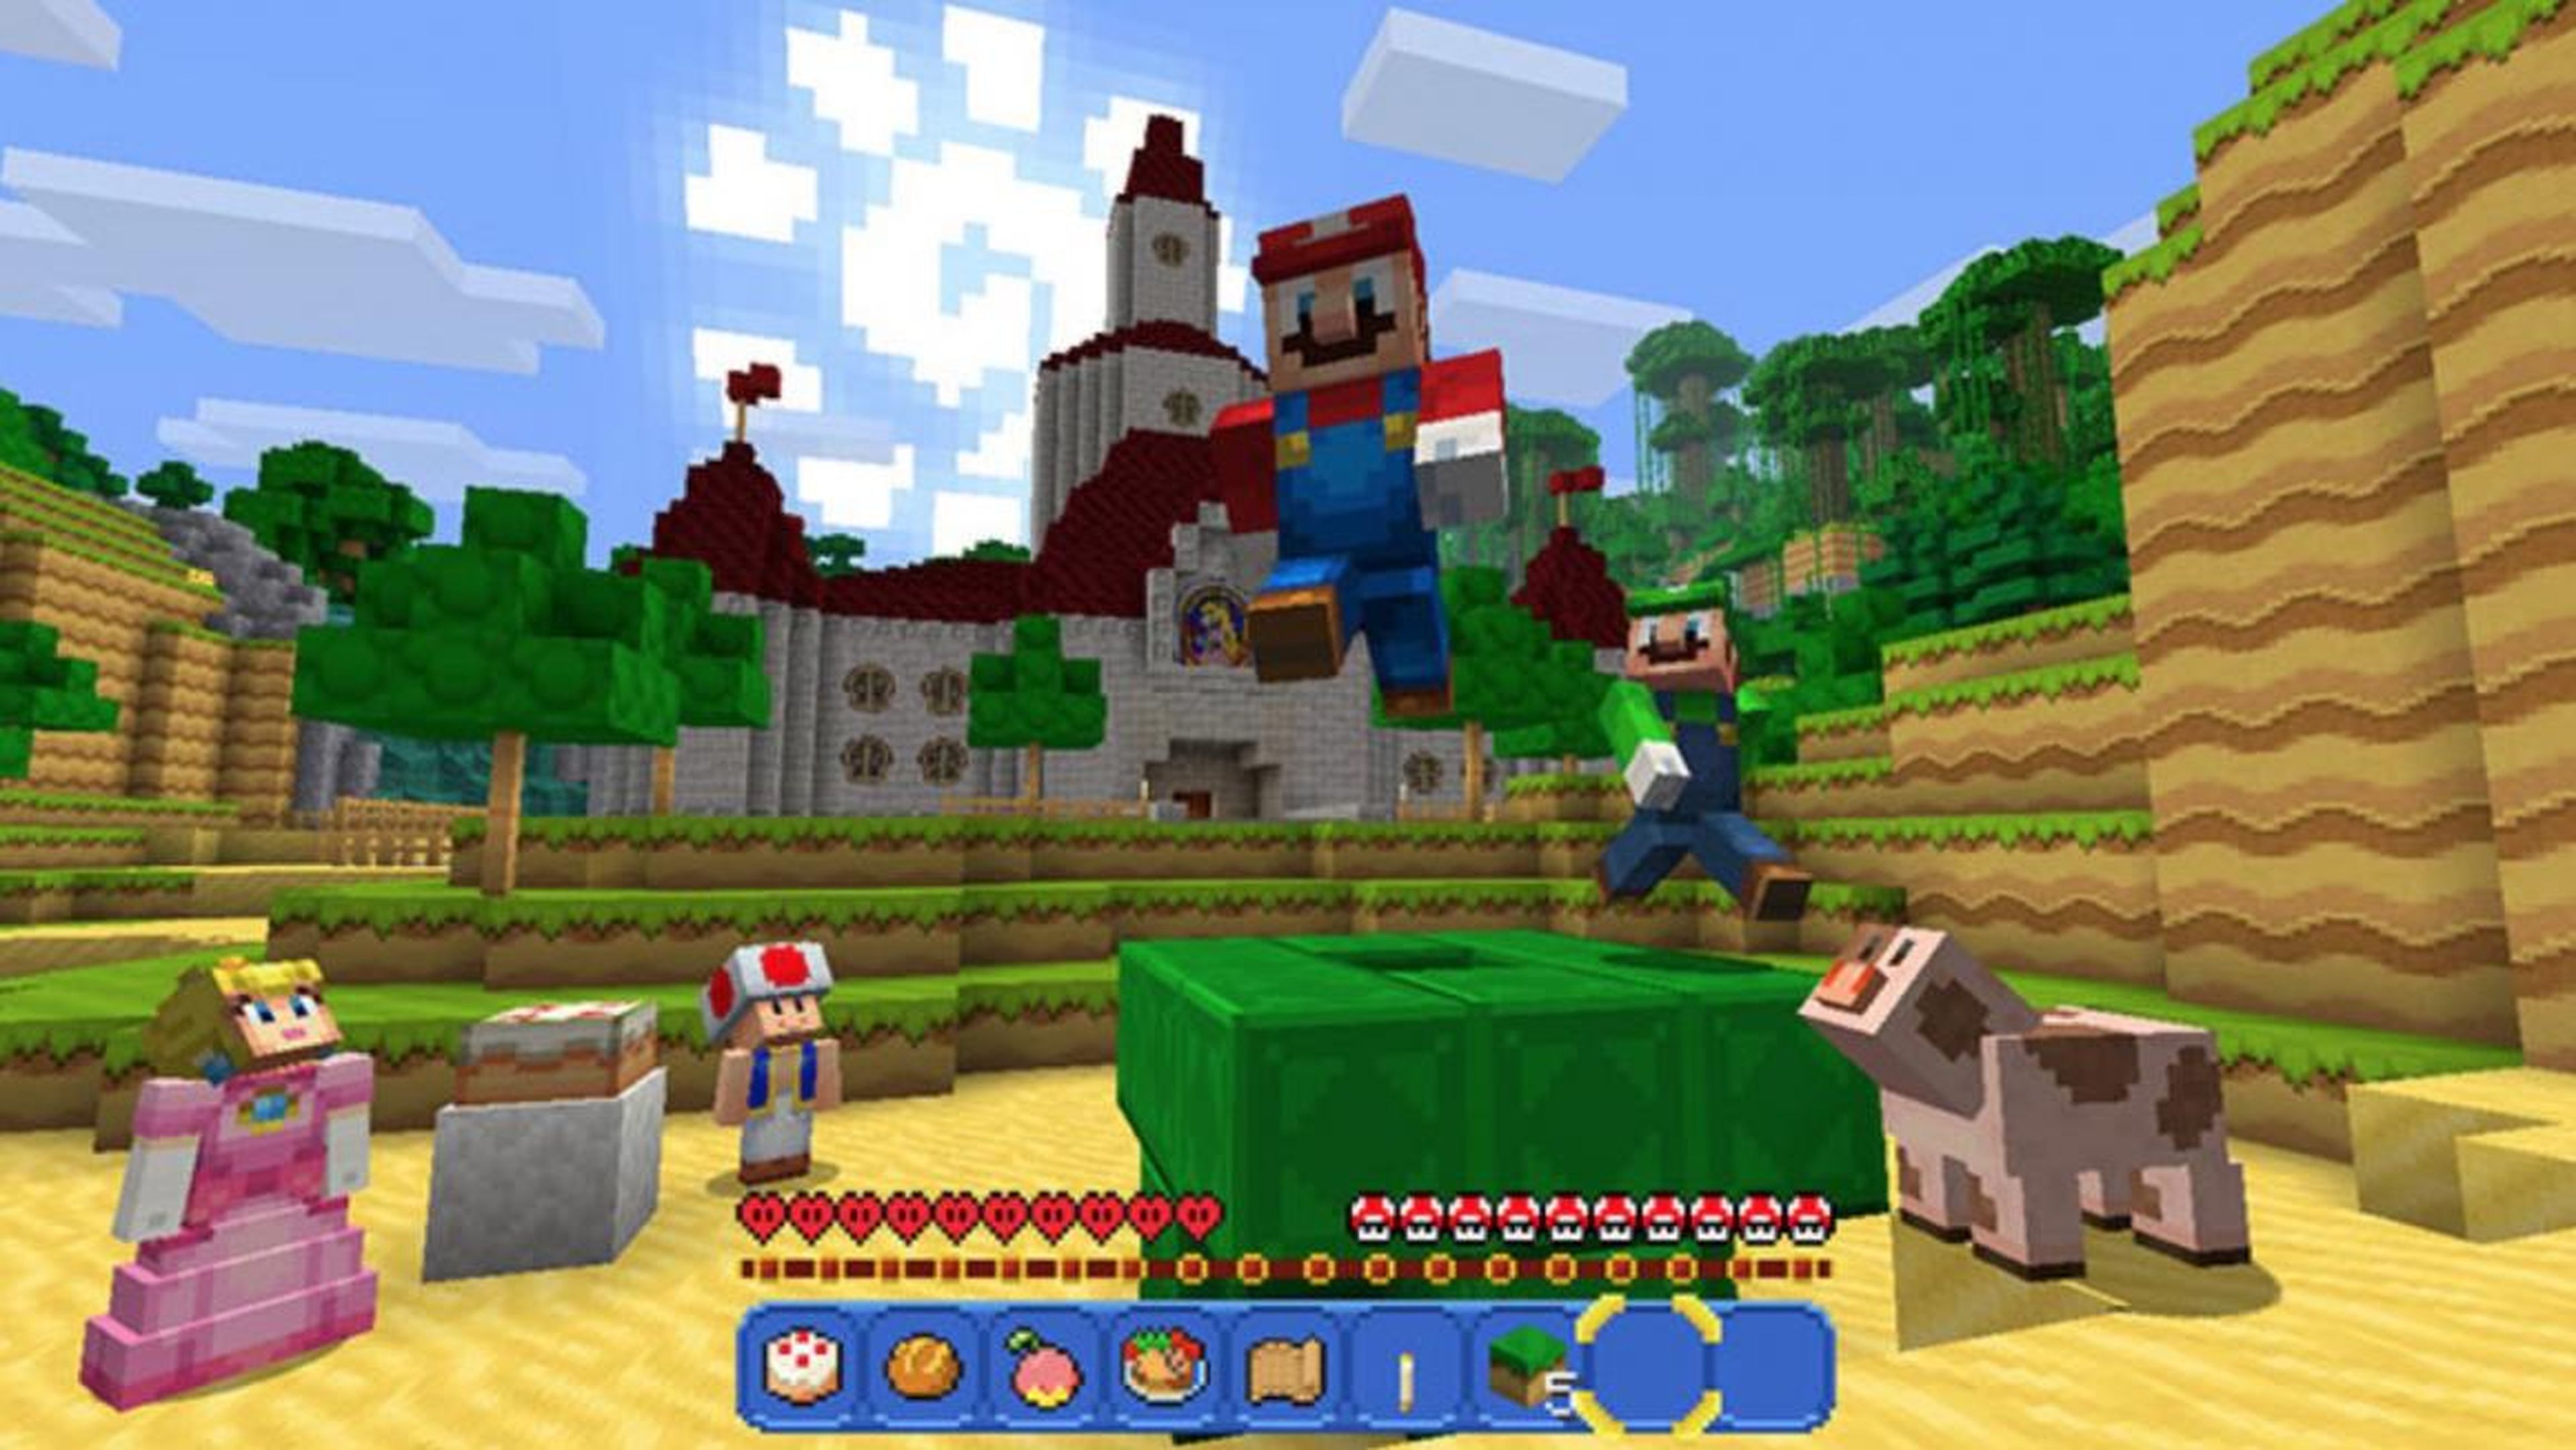 Nintendo characters even appear in the Microsoft-owned "Minecraft."